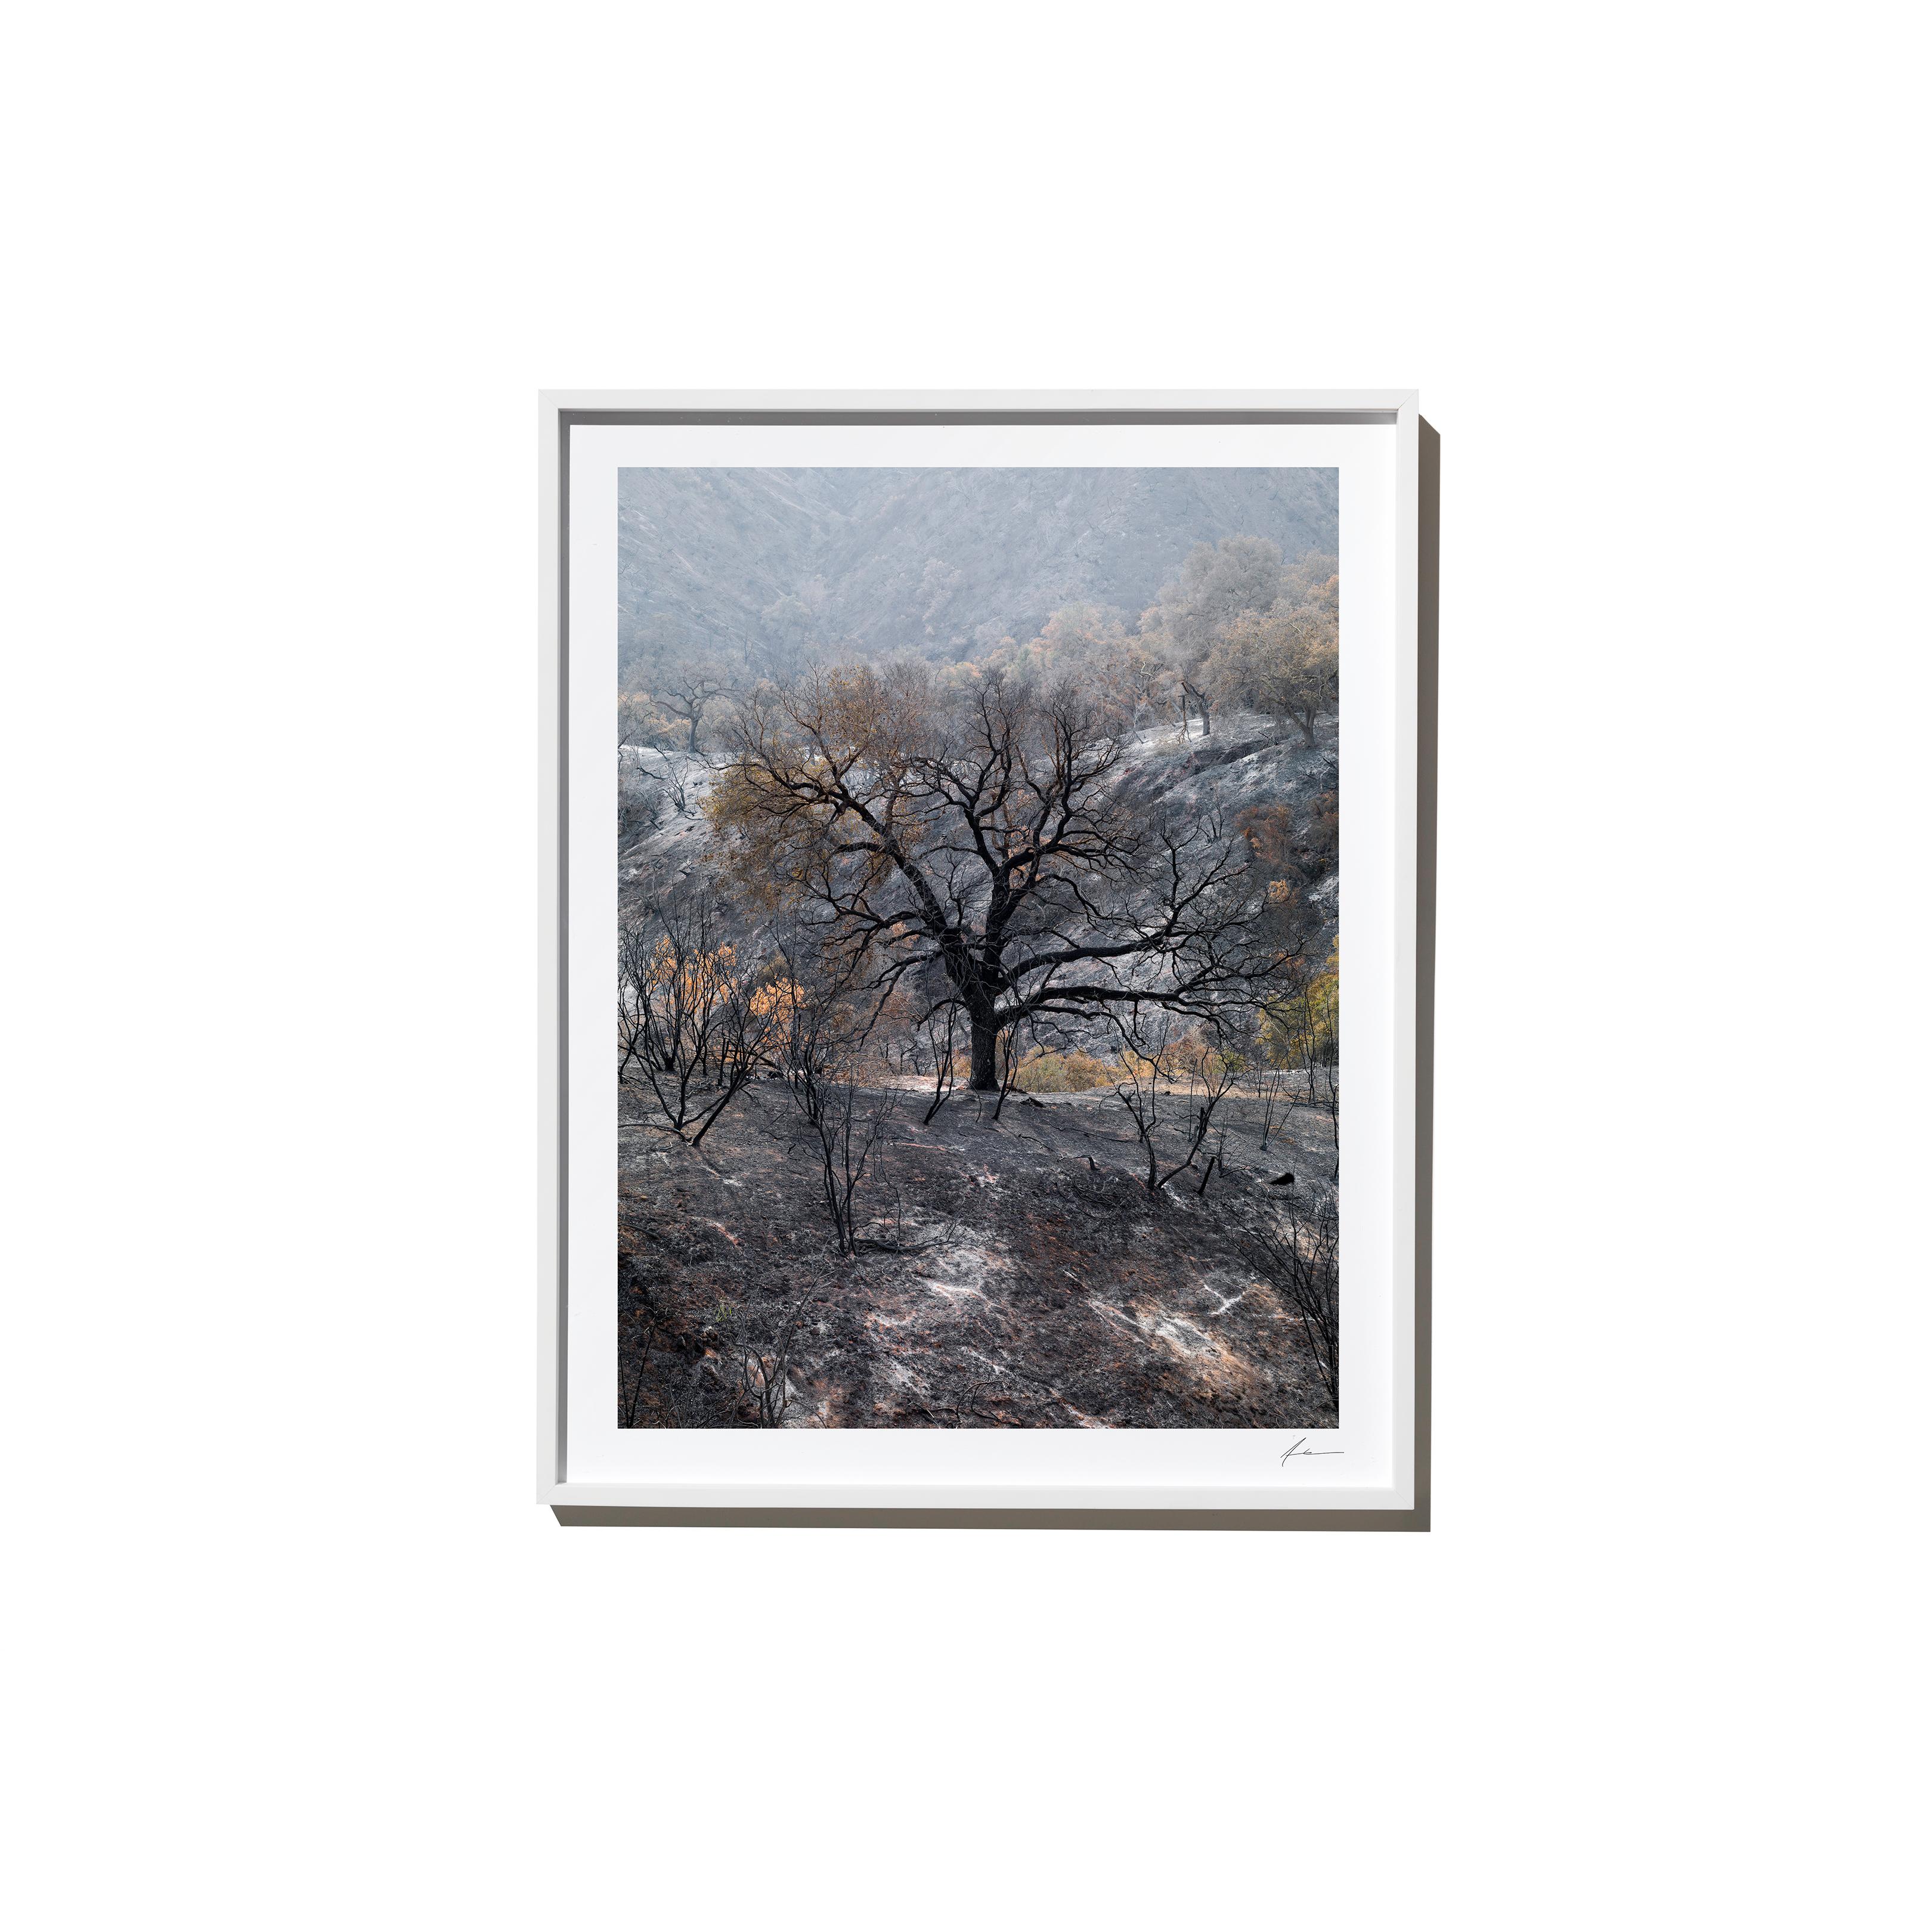 "Farther" is a framed color landscape photograph by Los Angeles-based photographer Timothy Hogan. 

Frame available in white or black, please specify on order. Please allow 15 days for production before shipping.

Editions and sizes as